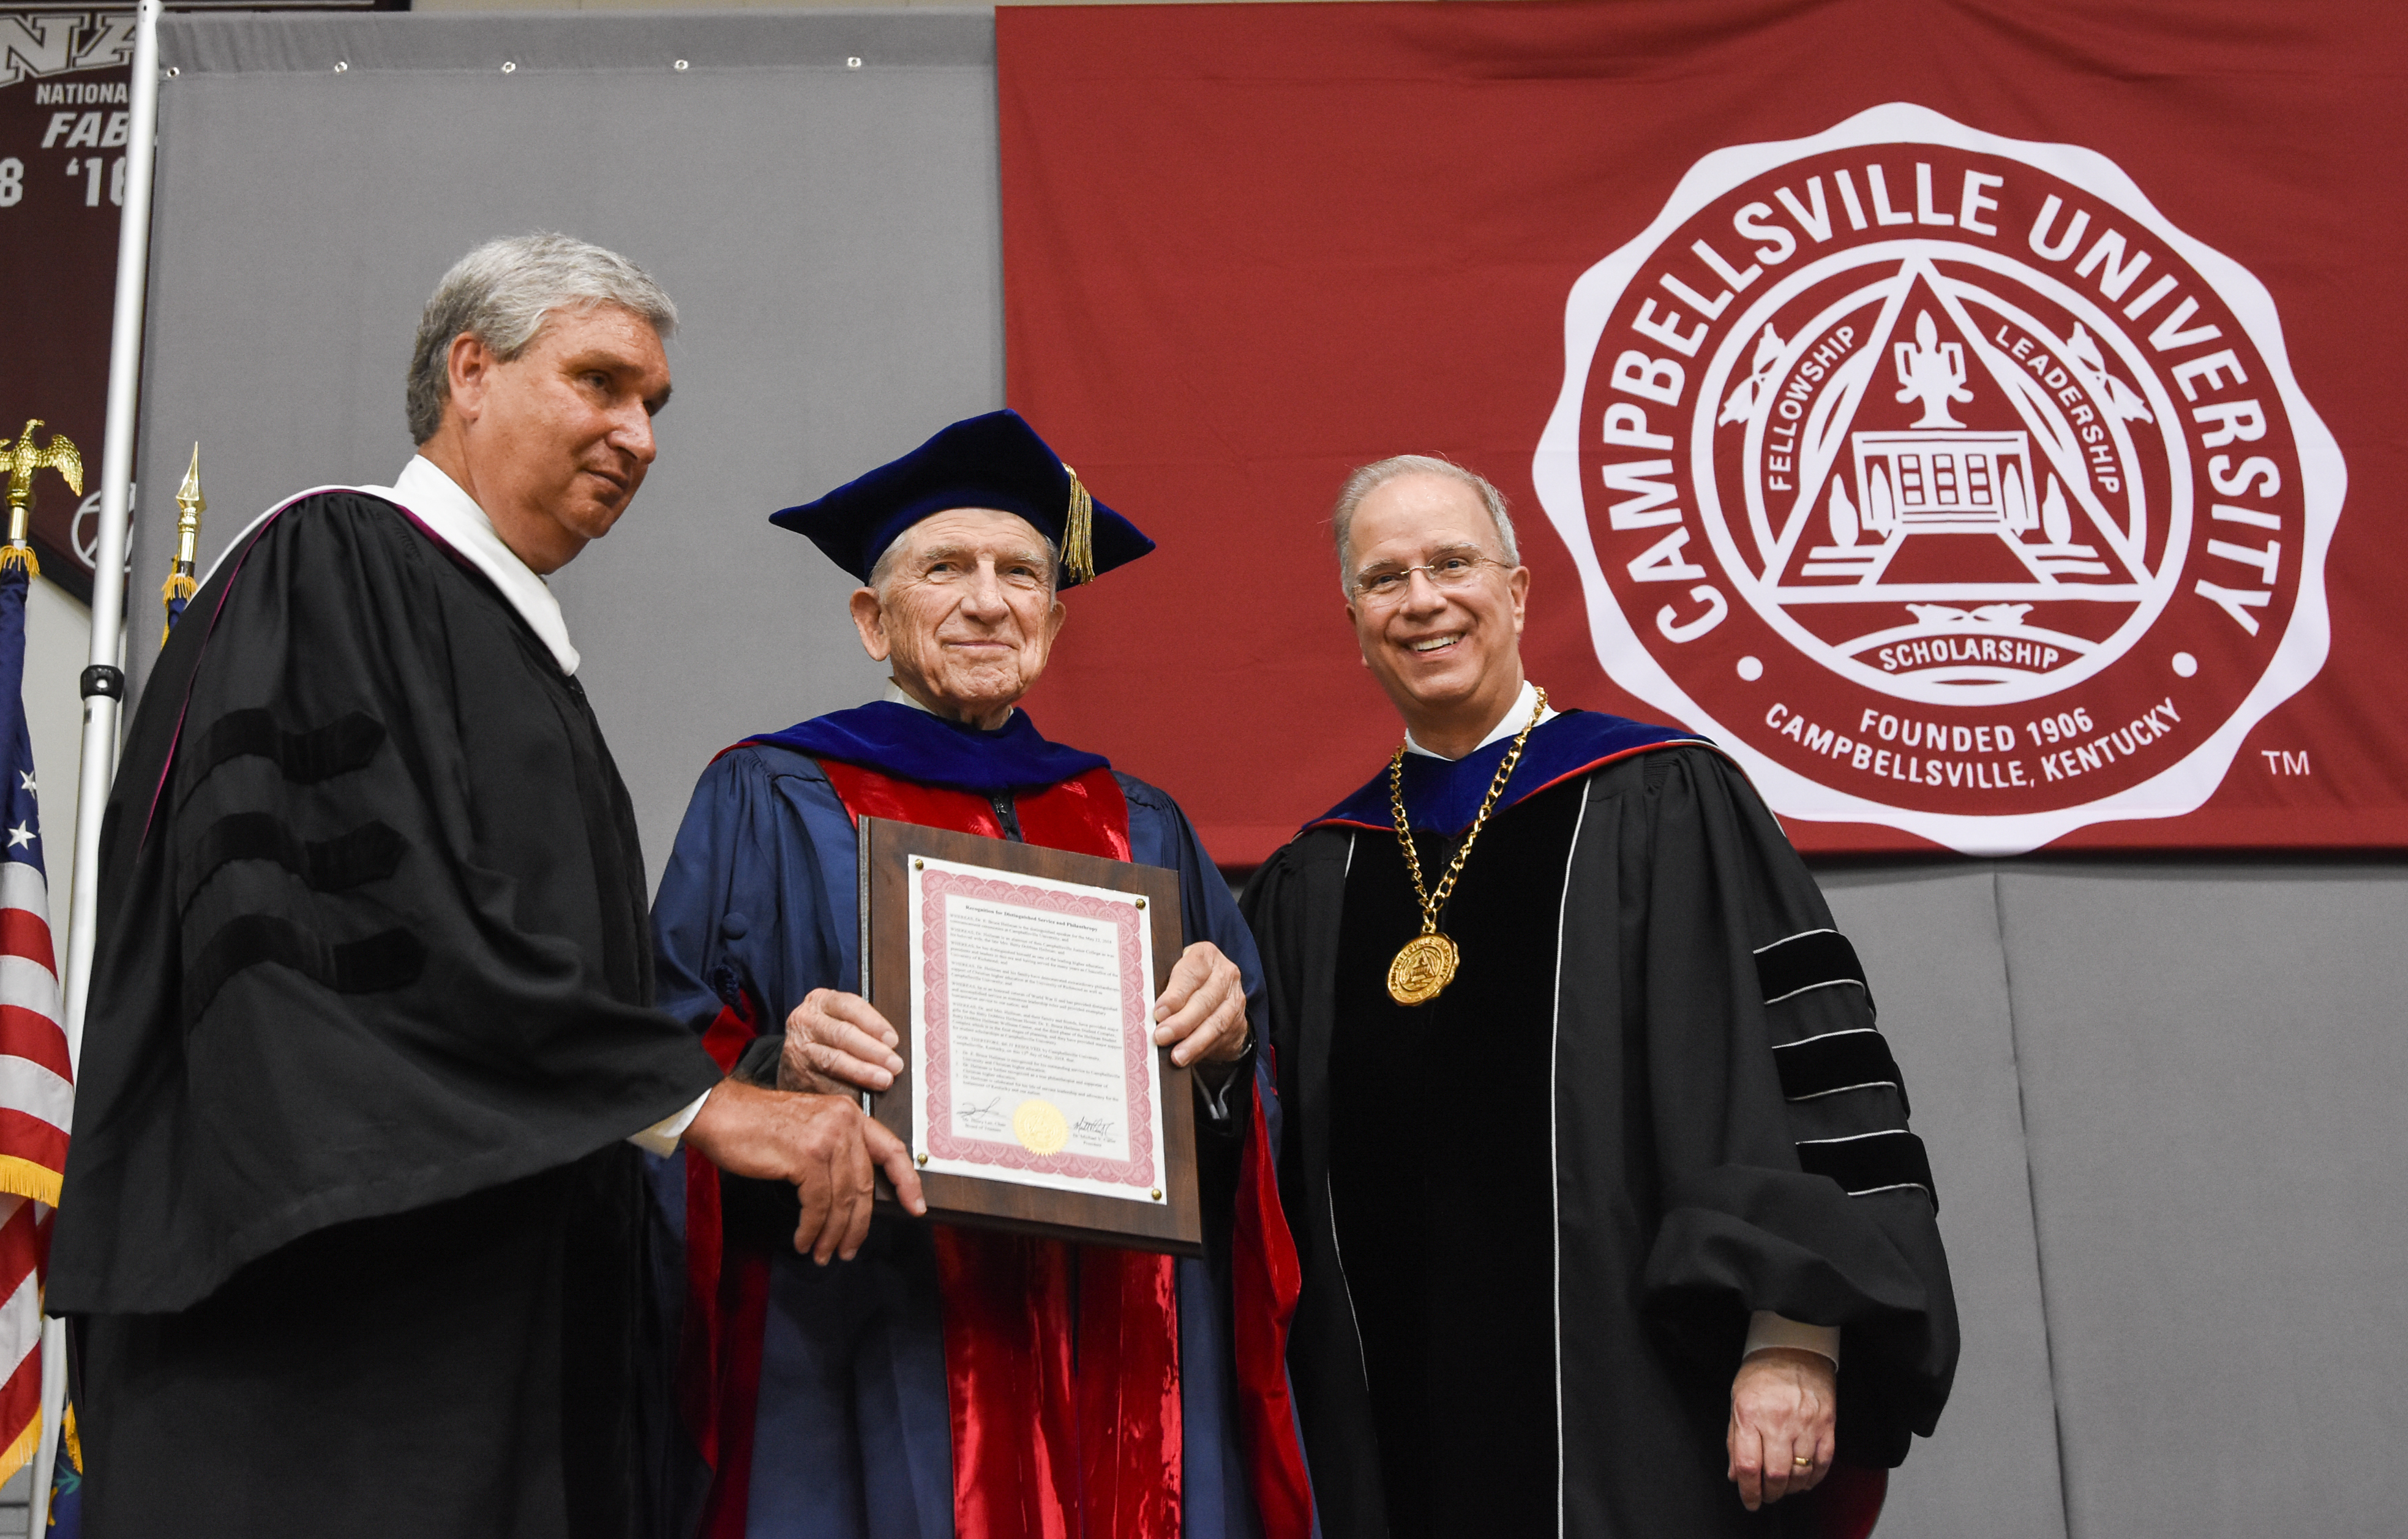 Dr.E. Bruce Heilman, chancellor of the University of Richmond, was the commencement speaker at both 9 a.m. and noon commencements. He was also awarded a plaque for Distinguished Service and Philanthropy by Henry Lee, chair of the CU Board of Trustees, left, and Dr. Michael V. Carter, president, on right. (Campbellsville University Photo by Joshua Williams)